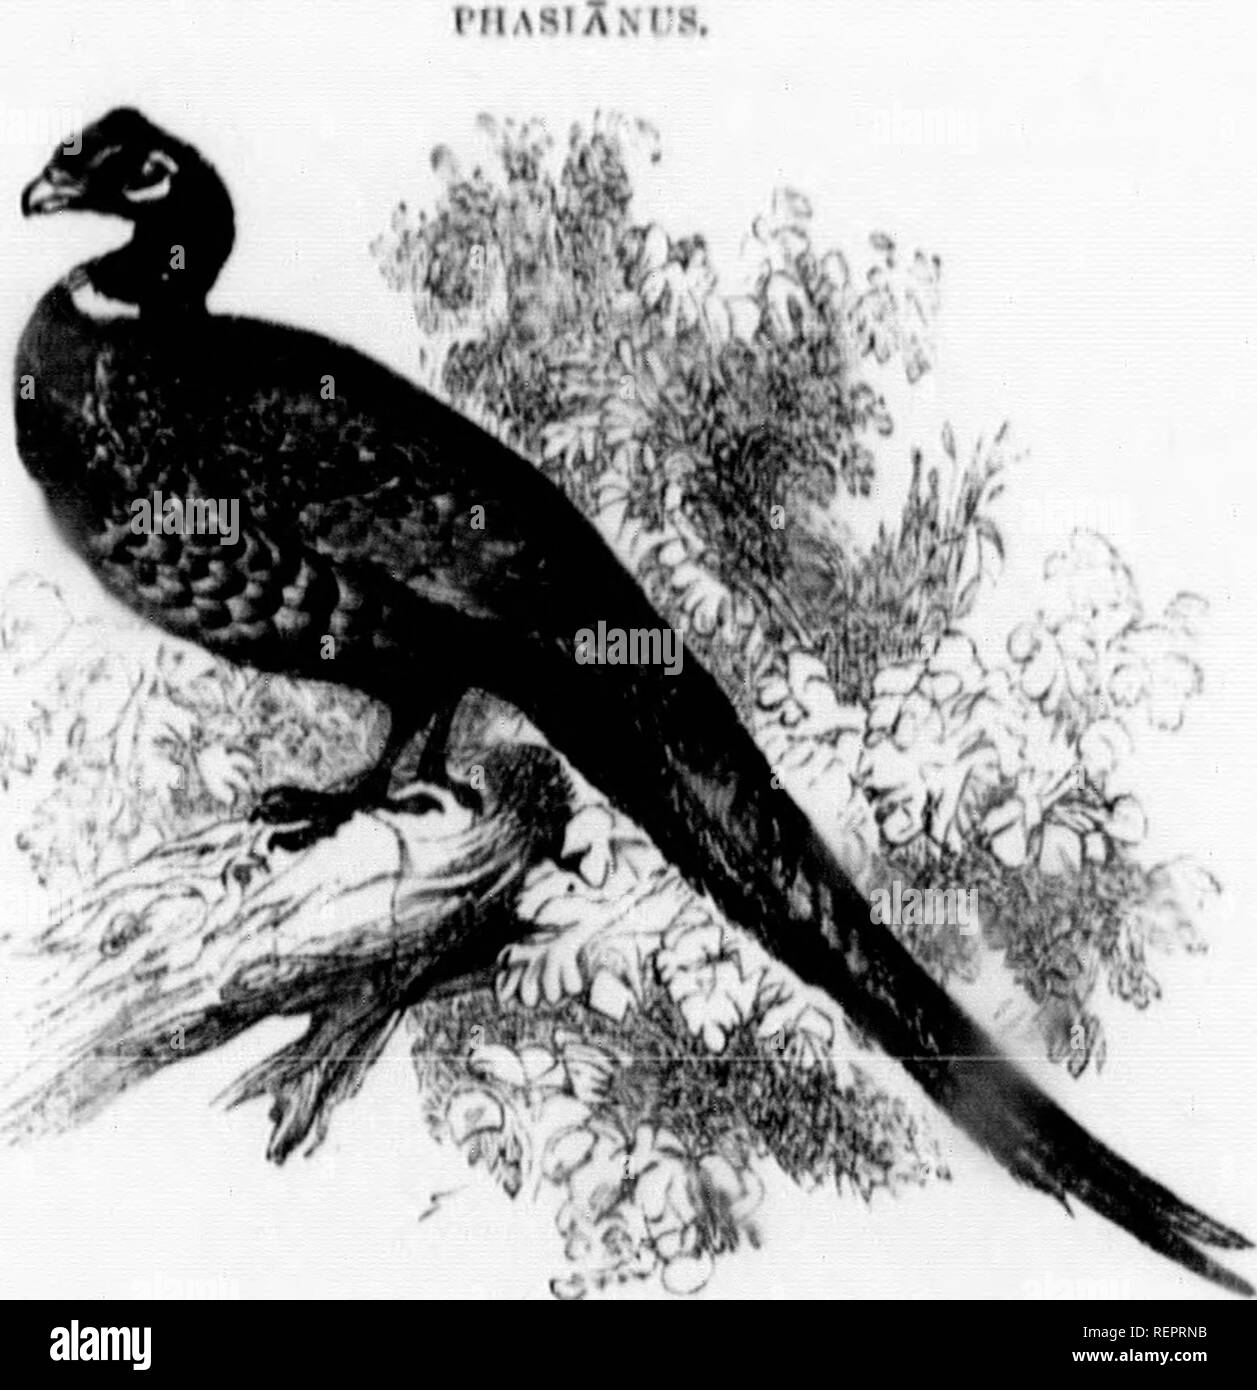 . The illustrated natural history [microform]. Natural history; Sciences naturelles. 3I« NATIJIIM, IirSTOUV.. ^•V&quot; t^ C*&quot; Colchlcus (Lat. V&quot;lvhian), llu Phtiuanl, The Common Pheasant was originally brought from (leorgia, and lias completely naturalJHcil itself in this country. It is a hardy hird, and hears the cold montlis very well. Although it can bo tamed and will come to be fed with the ])ciultry, yet an innate timidity prevents it from beiui^ thoroughly domesticated. Young pheasants that have been hatcluil mider a hen, scam])er off in teri'or if an unexpected int'-uder make Stock Photo